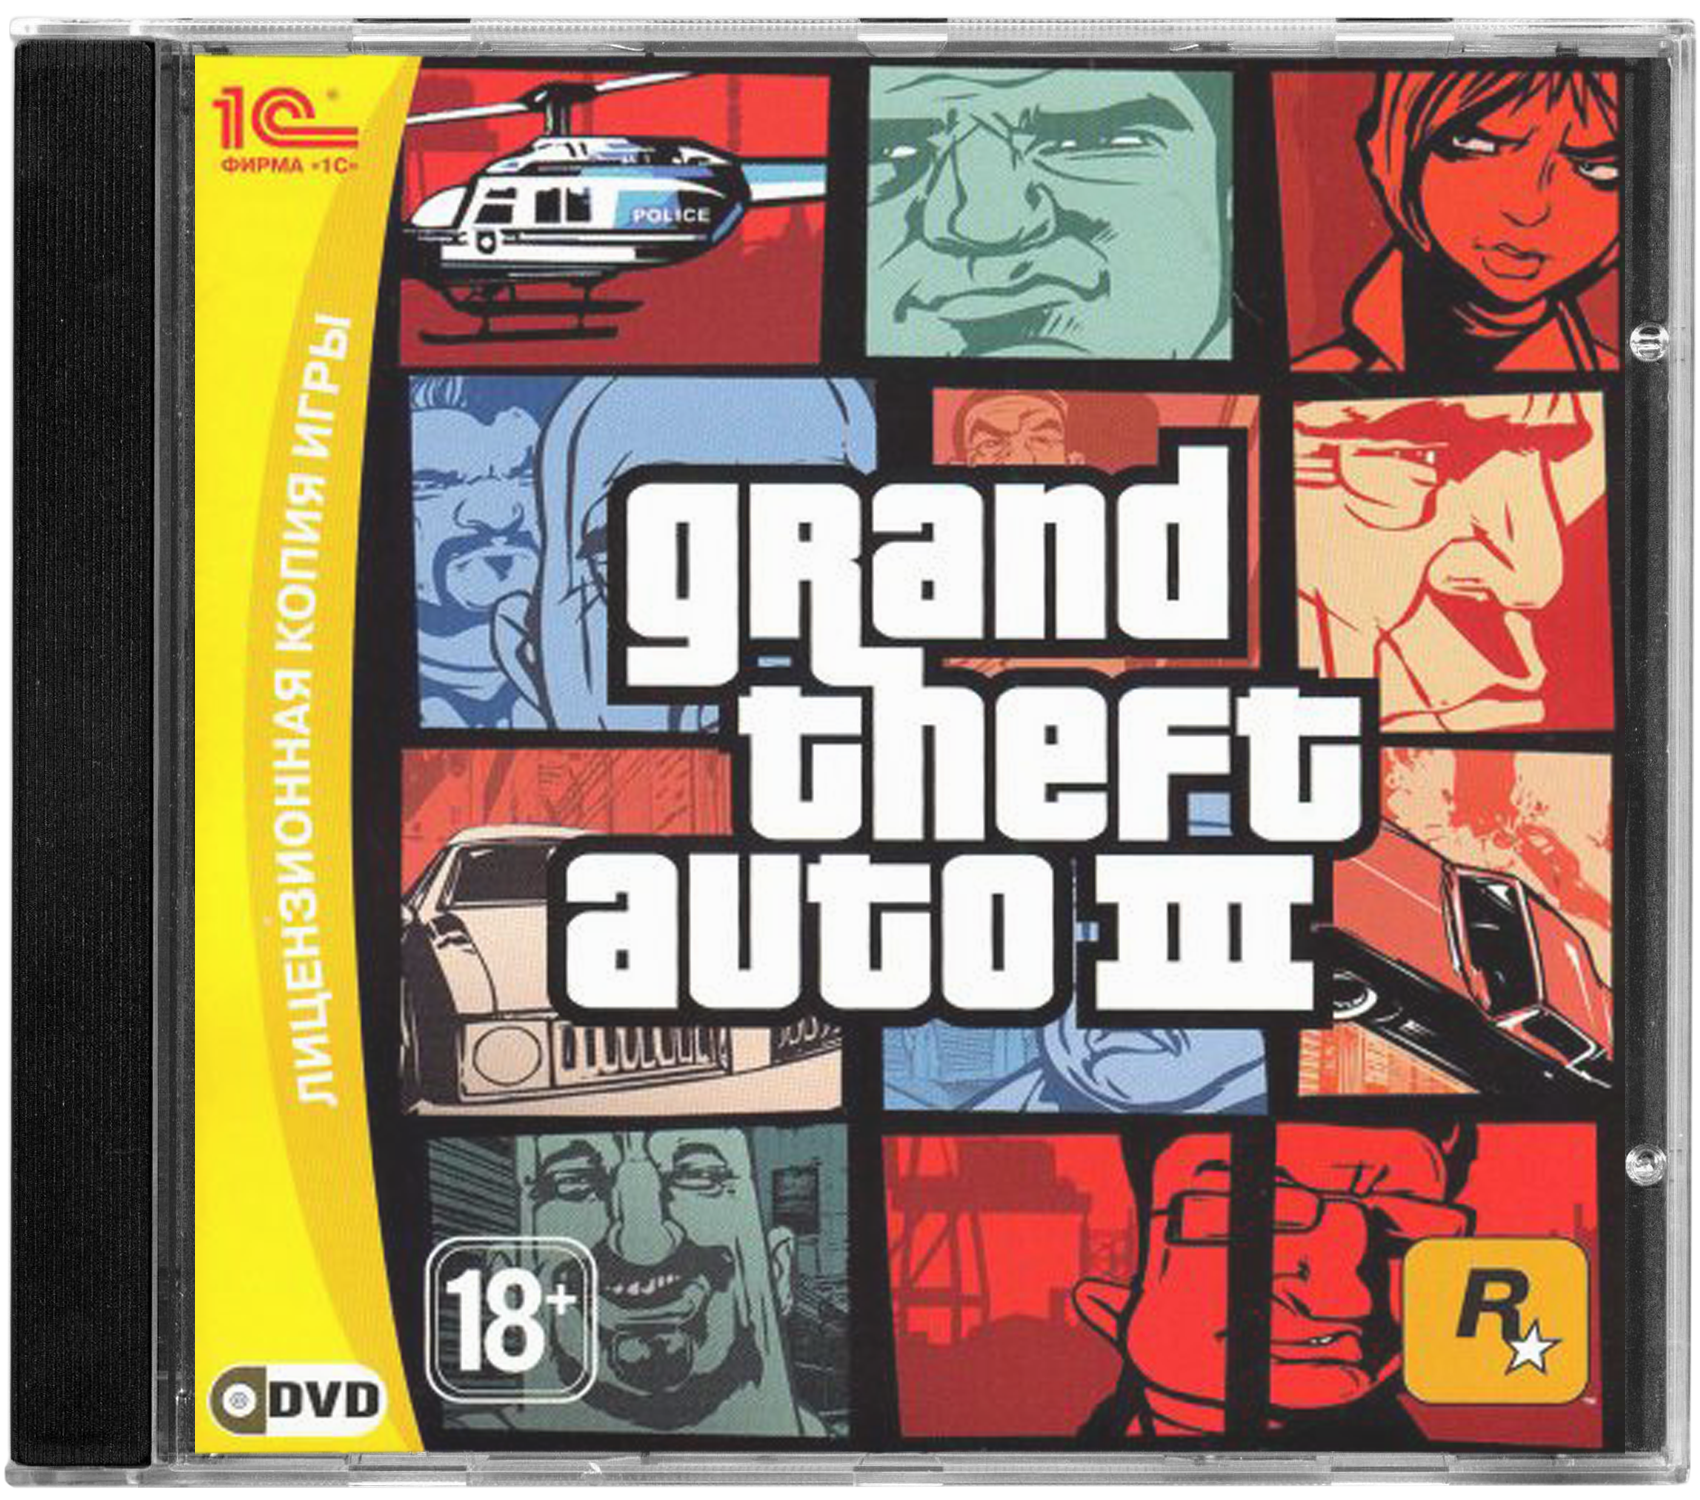 GTA 3 ps2 диск. Grand Theft auto III ps2 2000. DVD диск 1с: "Grand Theft auto: 3. Grand Theft auto III ps2.